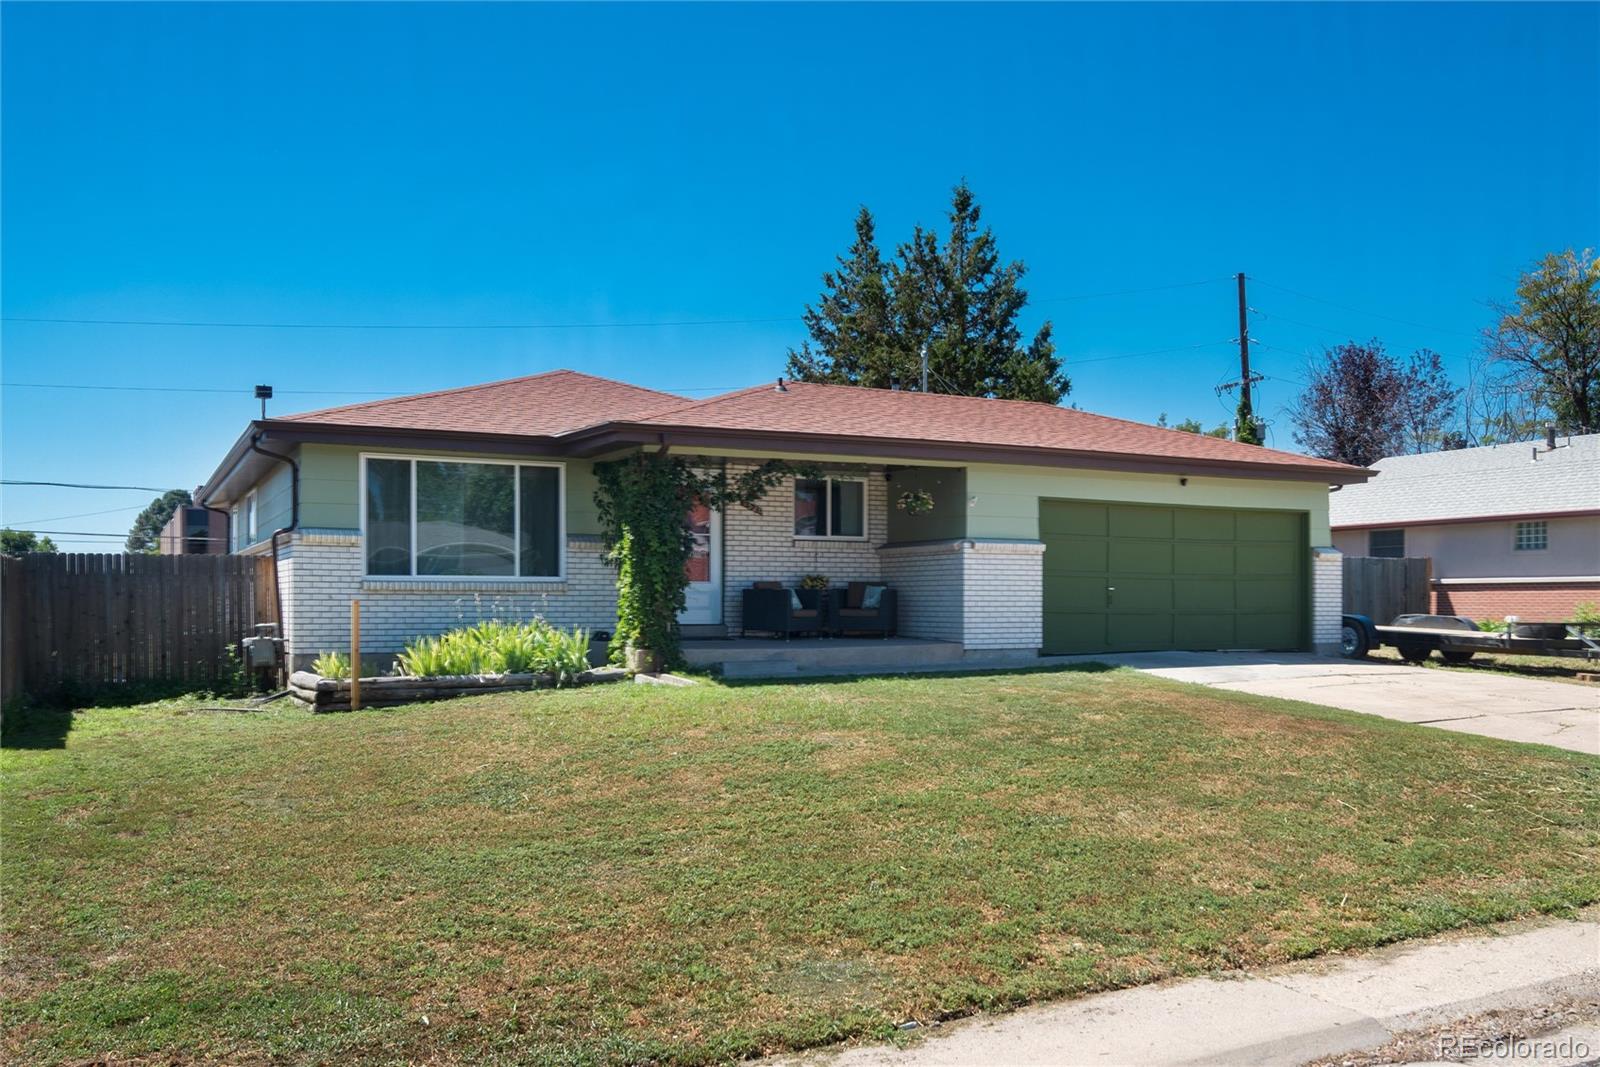 7520 w bails avenue, Lakewood sold home. Closed on 2024-03-01 for $600,000.